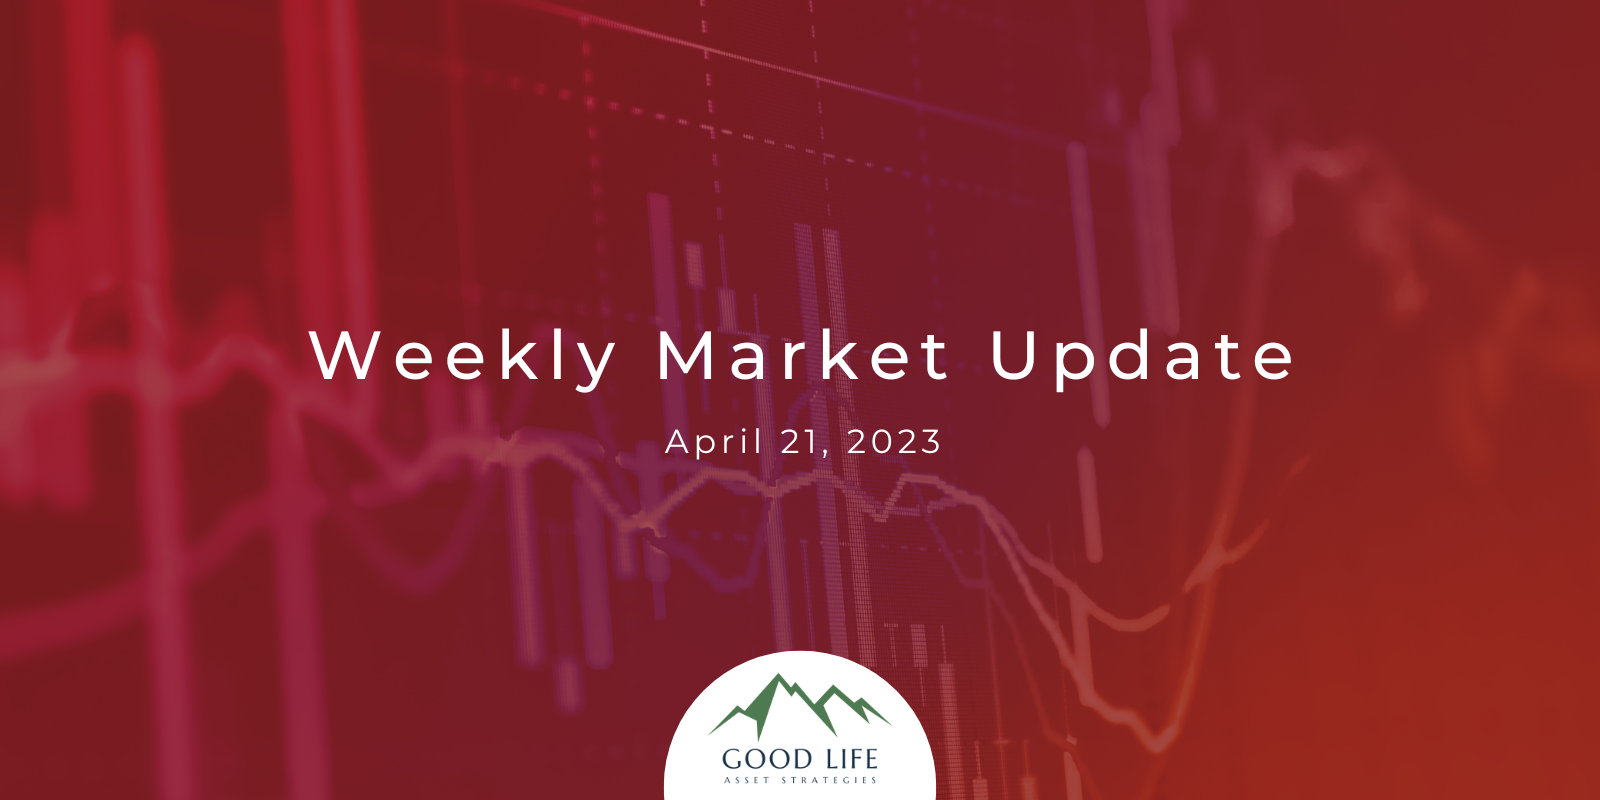 Stock market weekly update blog image for April 21, 2023.